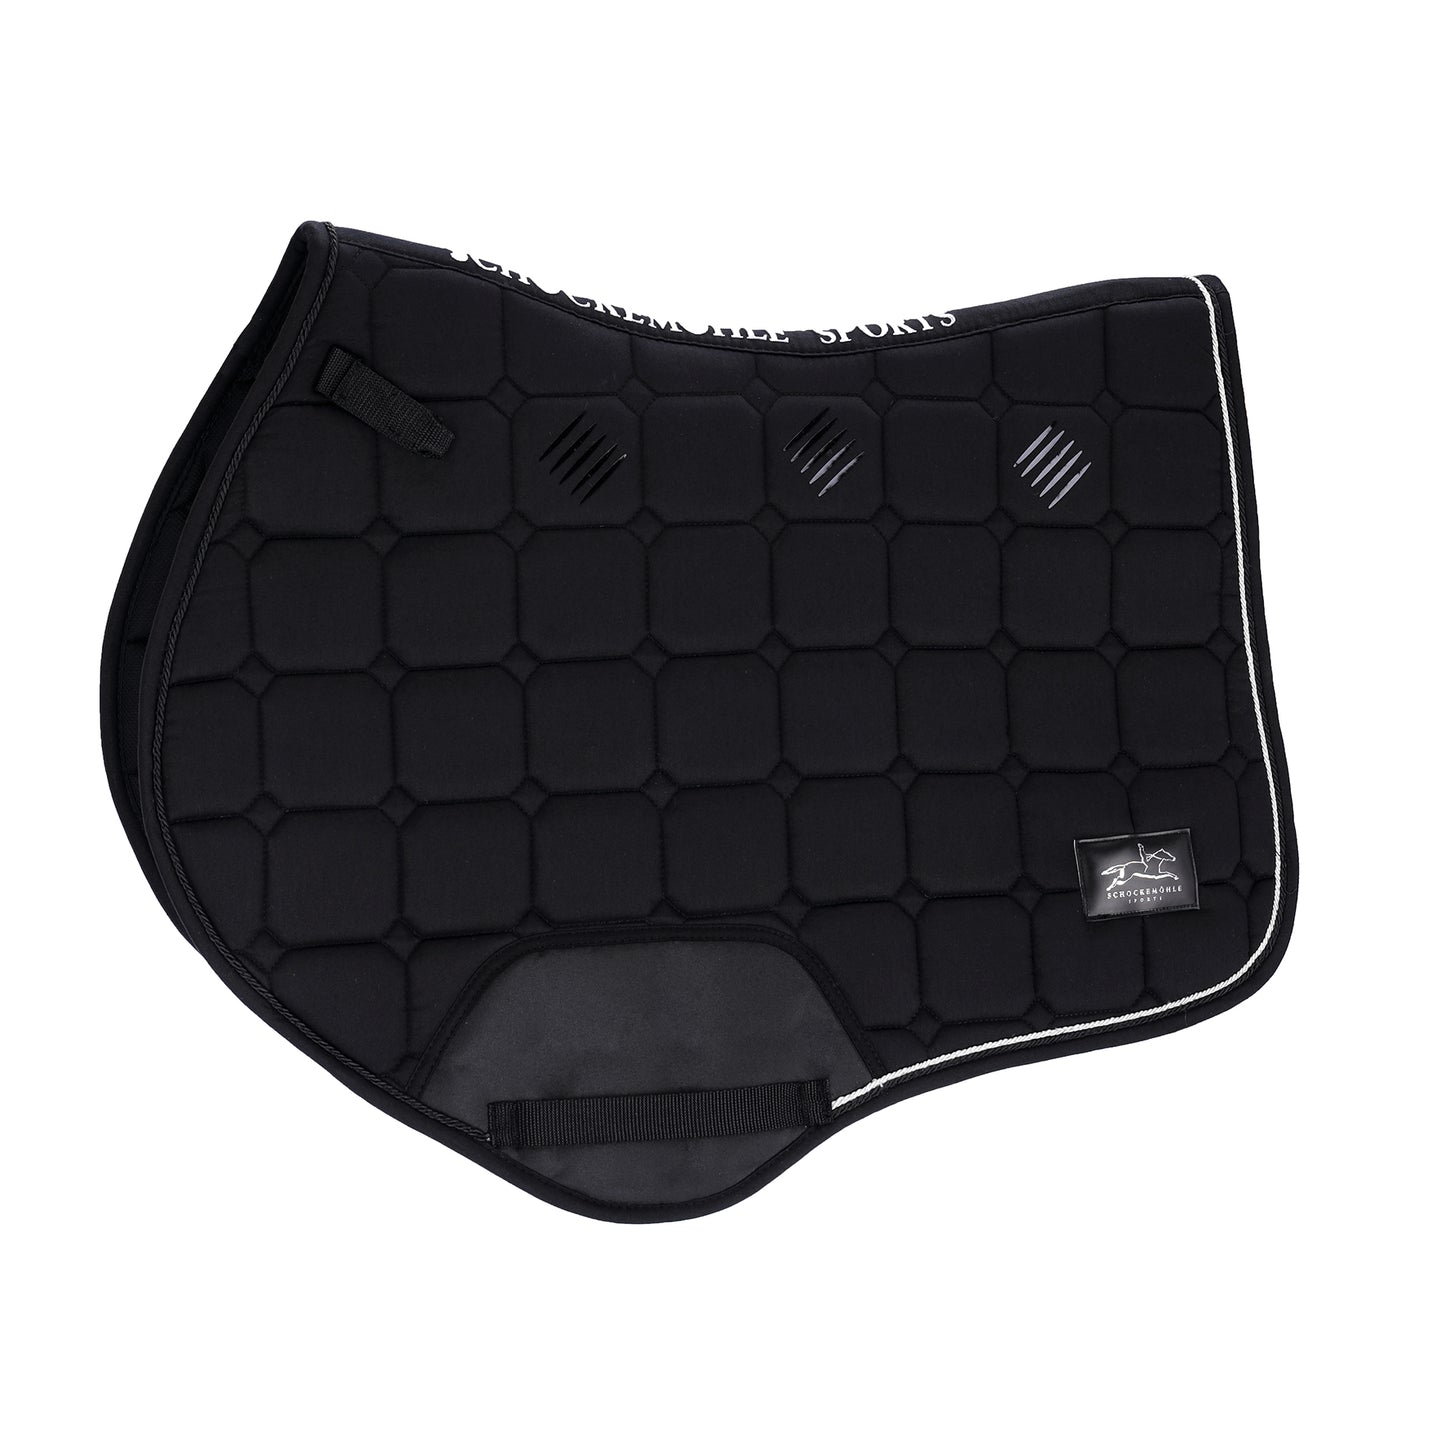 SCHOCKEMOHLE SPORTS NEW POWER PAD JUMPING STYLE